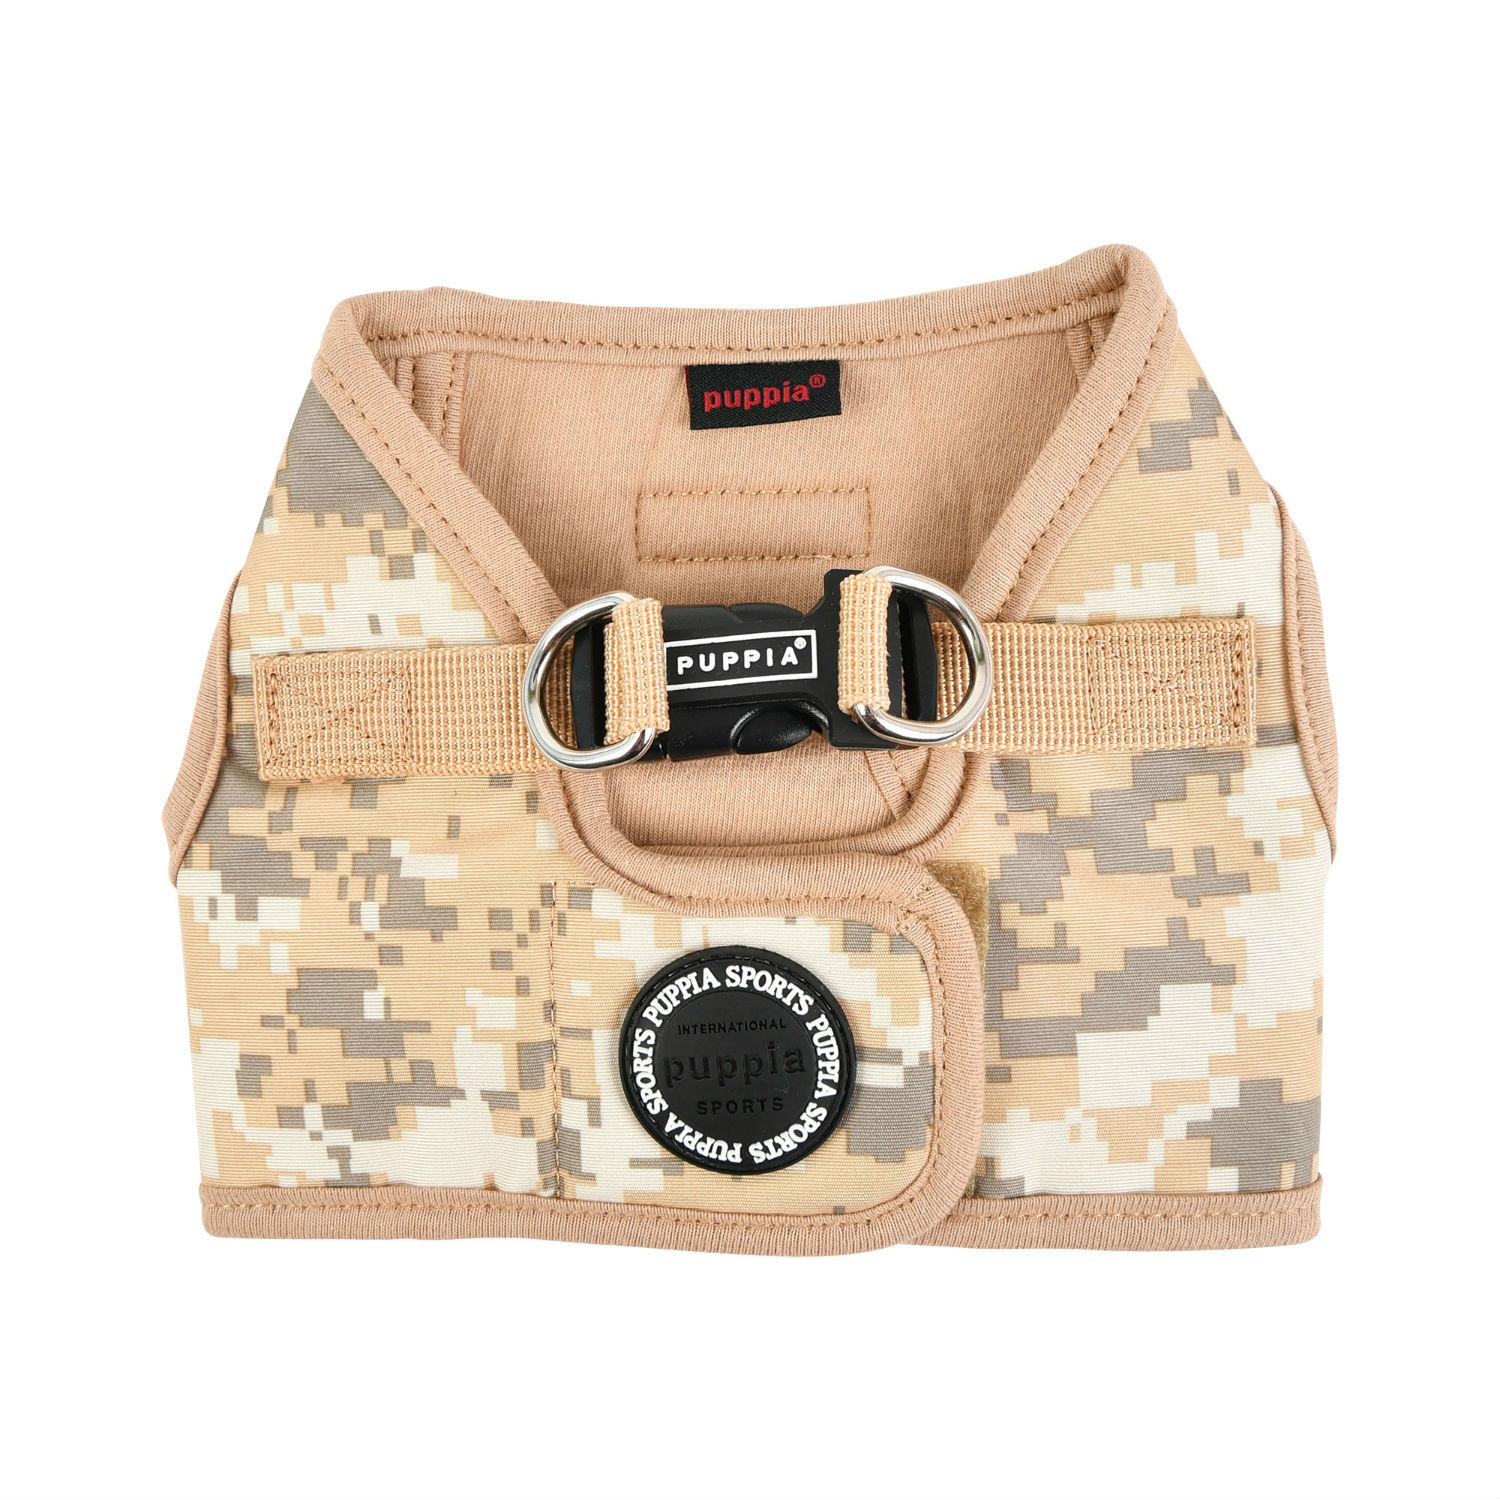 Sentinel Vest Dog Harness by Puppia - Beige Camo